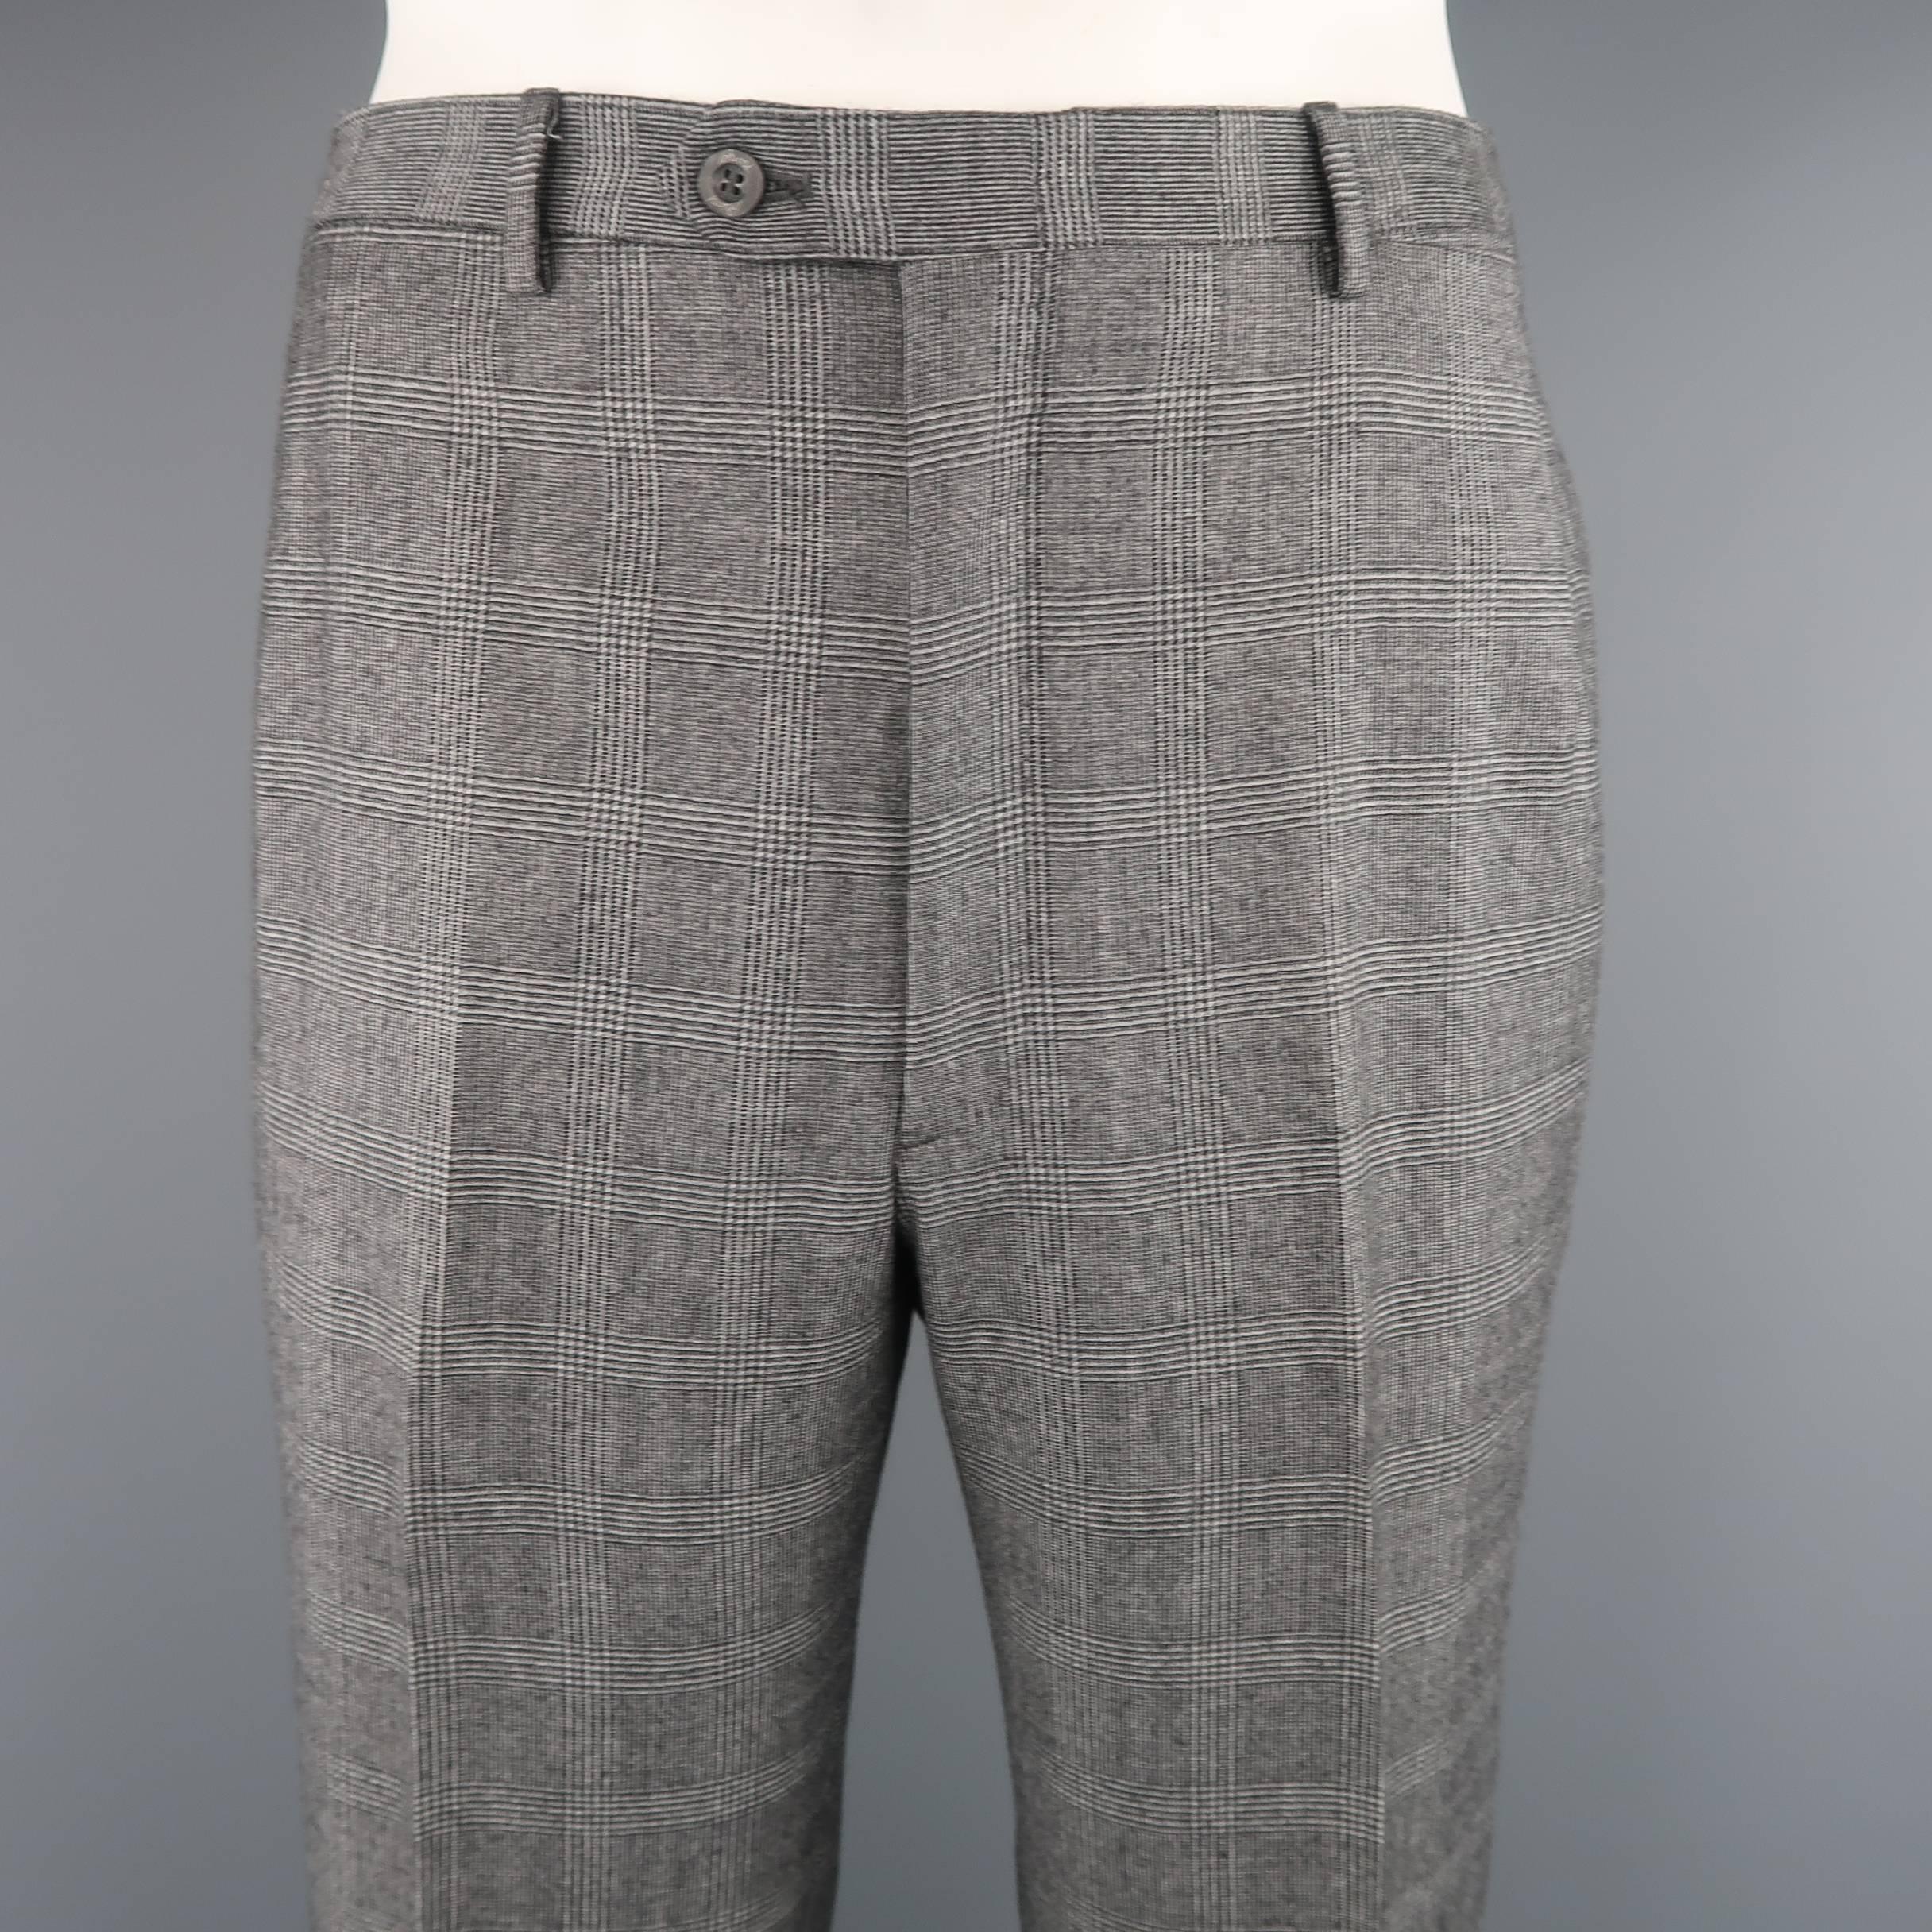 Classic BRIONI dress pants come in gray glenplaid wool blend material with a flat front and cuffed hem. Made in Italy.
 
Excellent Pre-Owned Condition.
Marked: 36 R
 
Measurements:
 
Waist: 34 in. (+2 in. )
Rise: 1.5 in.
Inseam: 31 in.
 
(Let Out